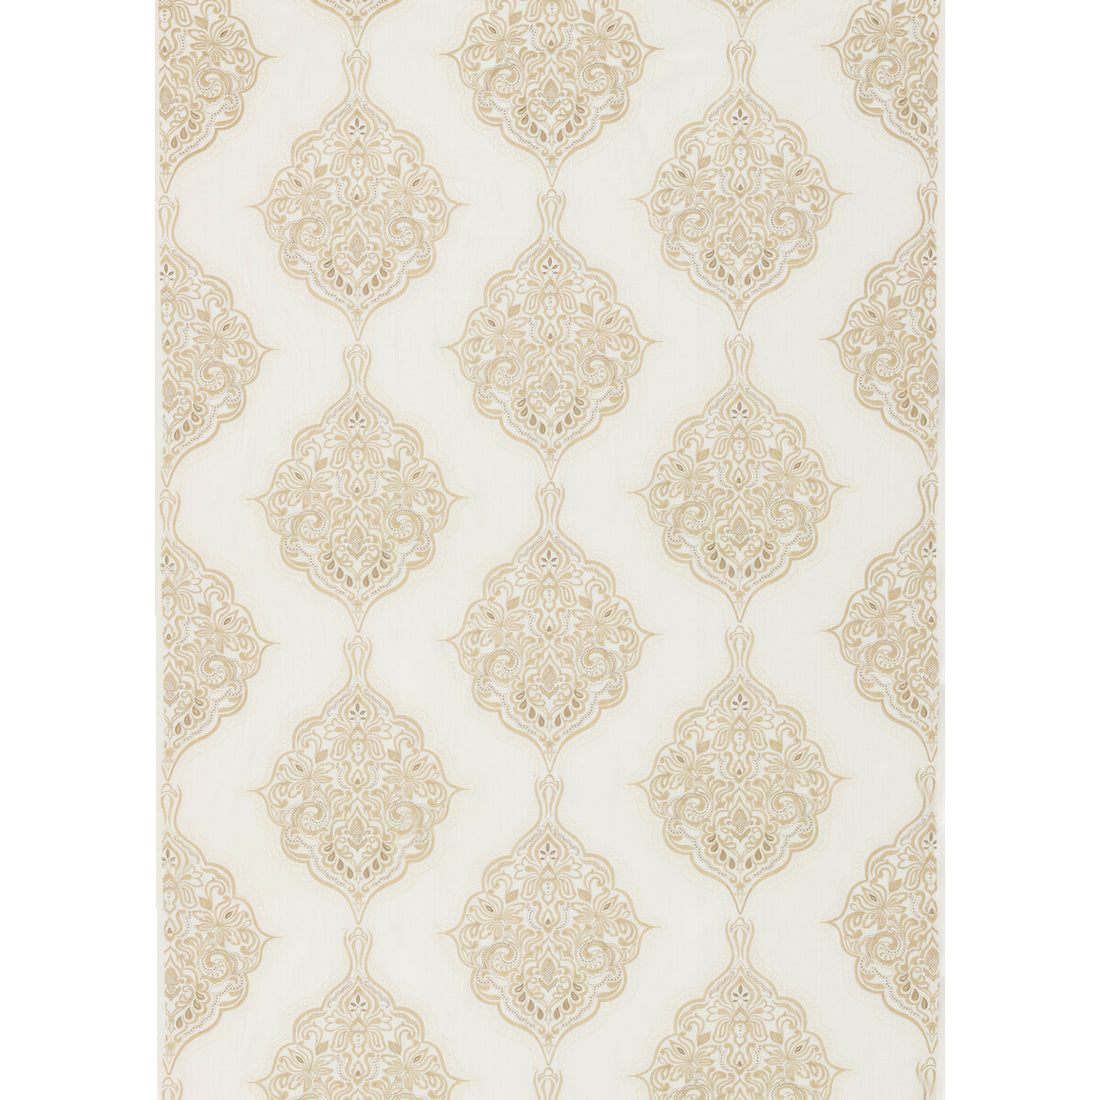 Montacute fabric in ivory/stone color - pattern BF10767.1.0 - by G P &amp; J Baker in the Keswick Embroideries collection